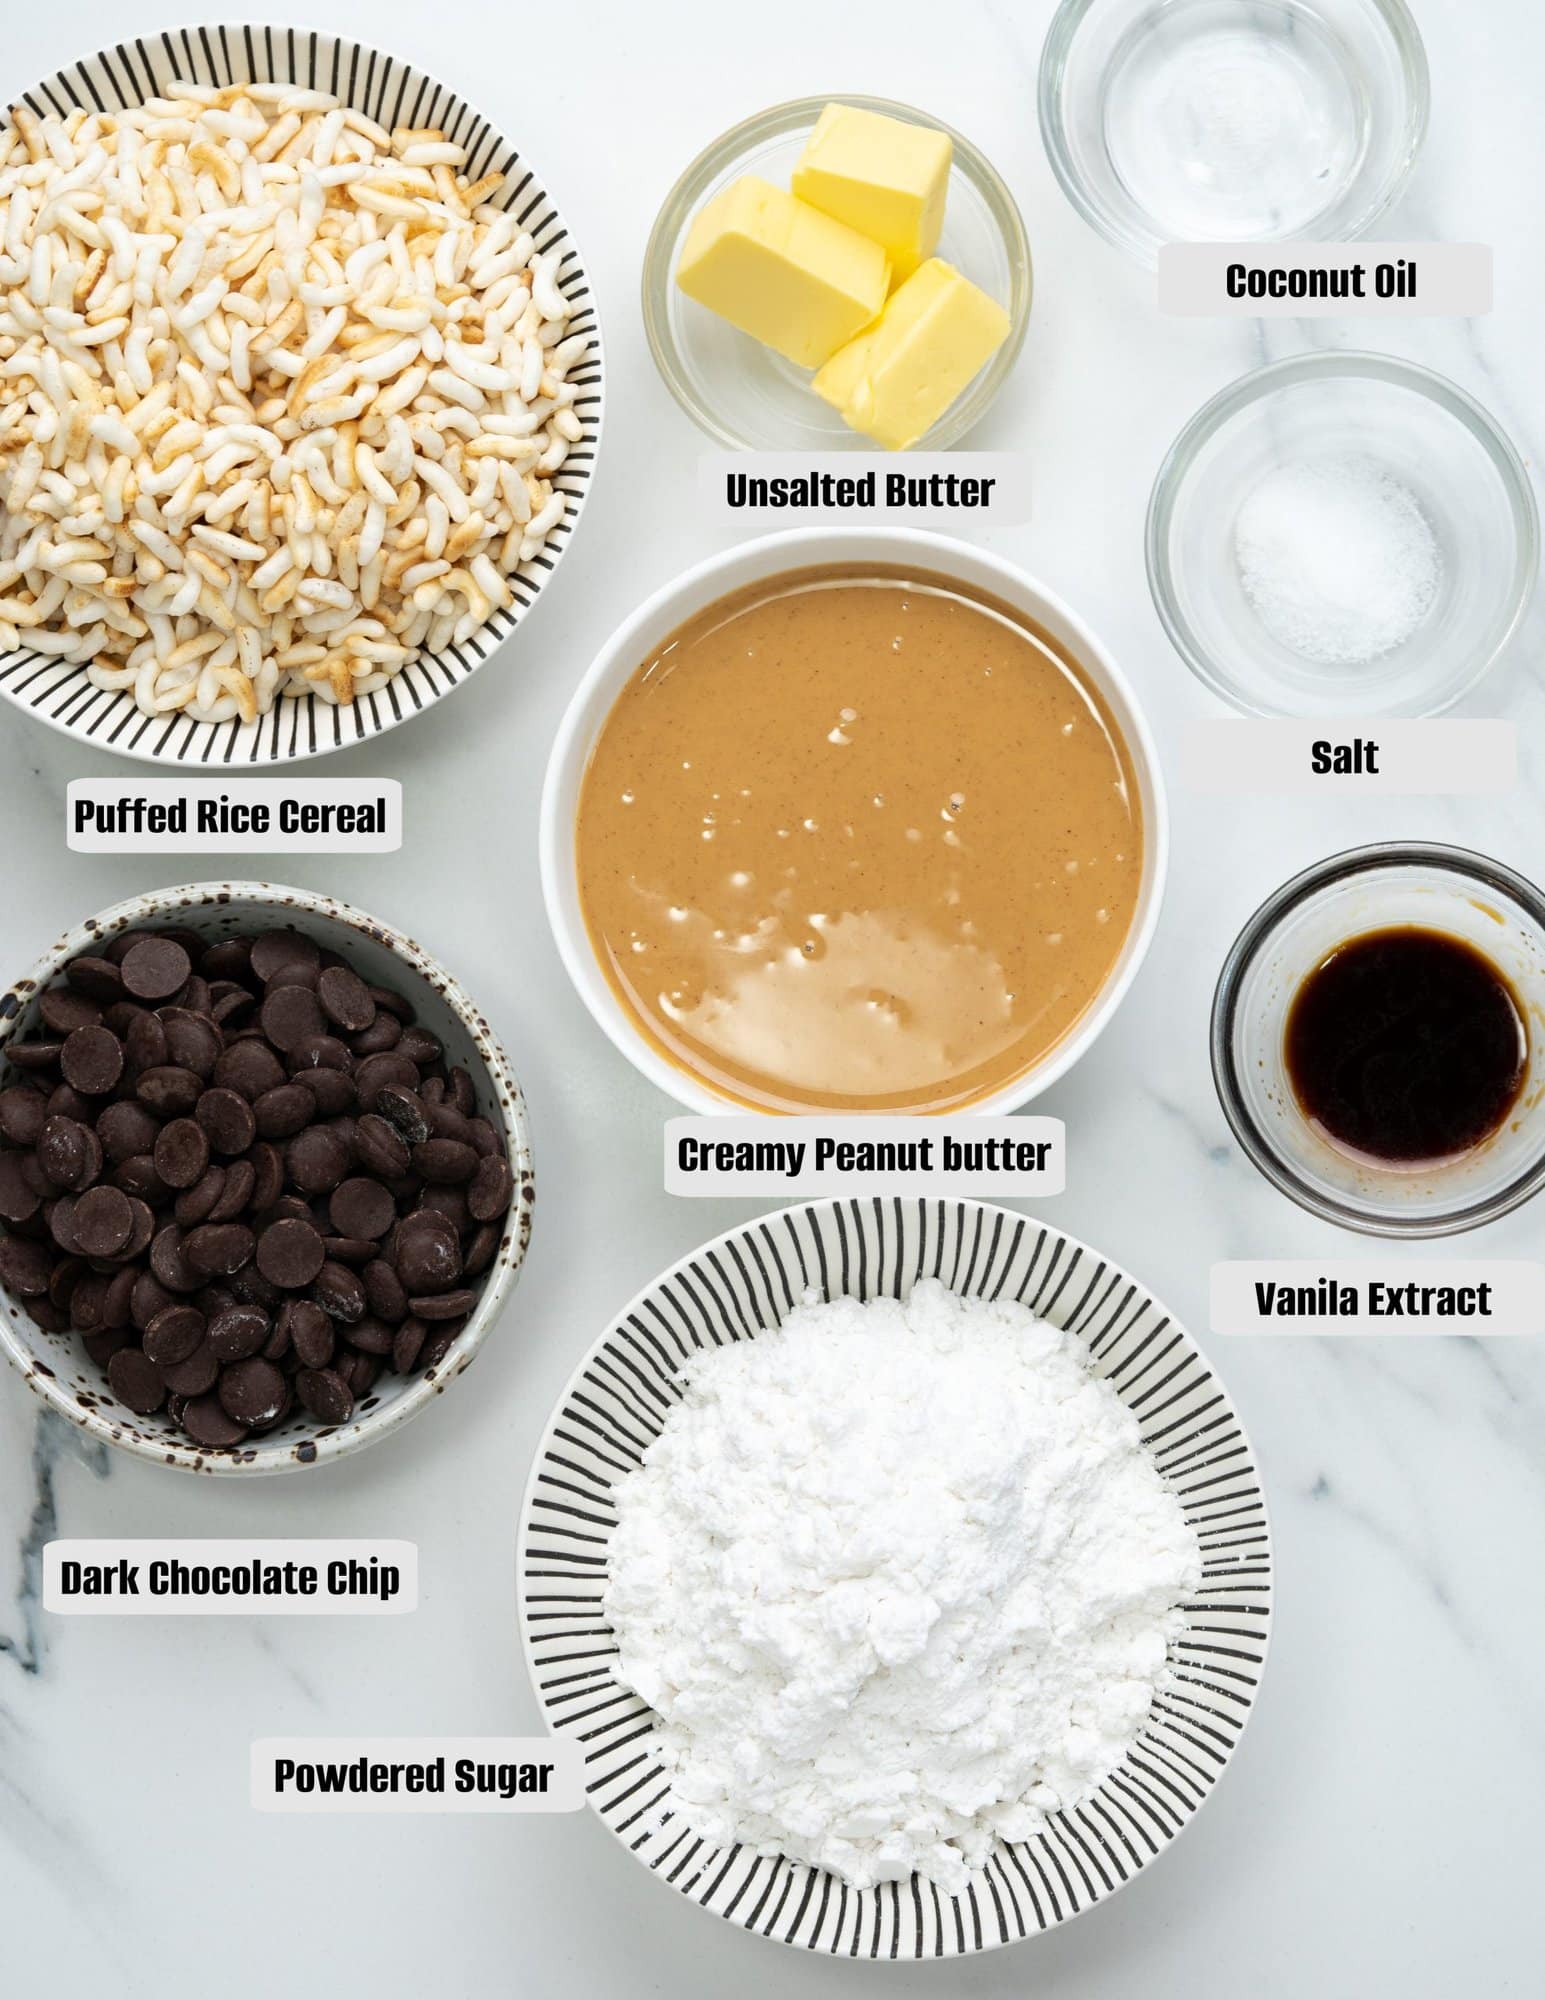 Ingredients for chocolate Peanut butter balls with rice krispies